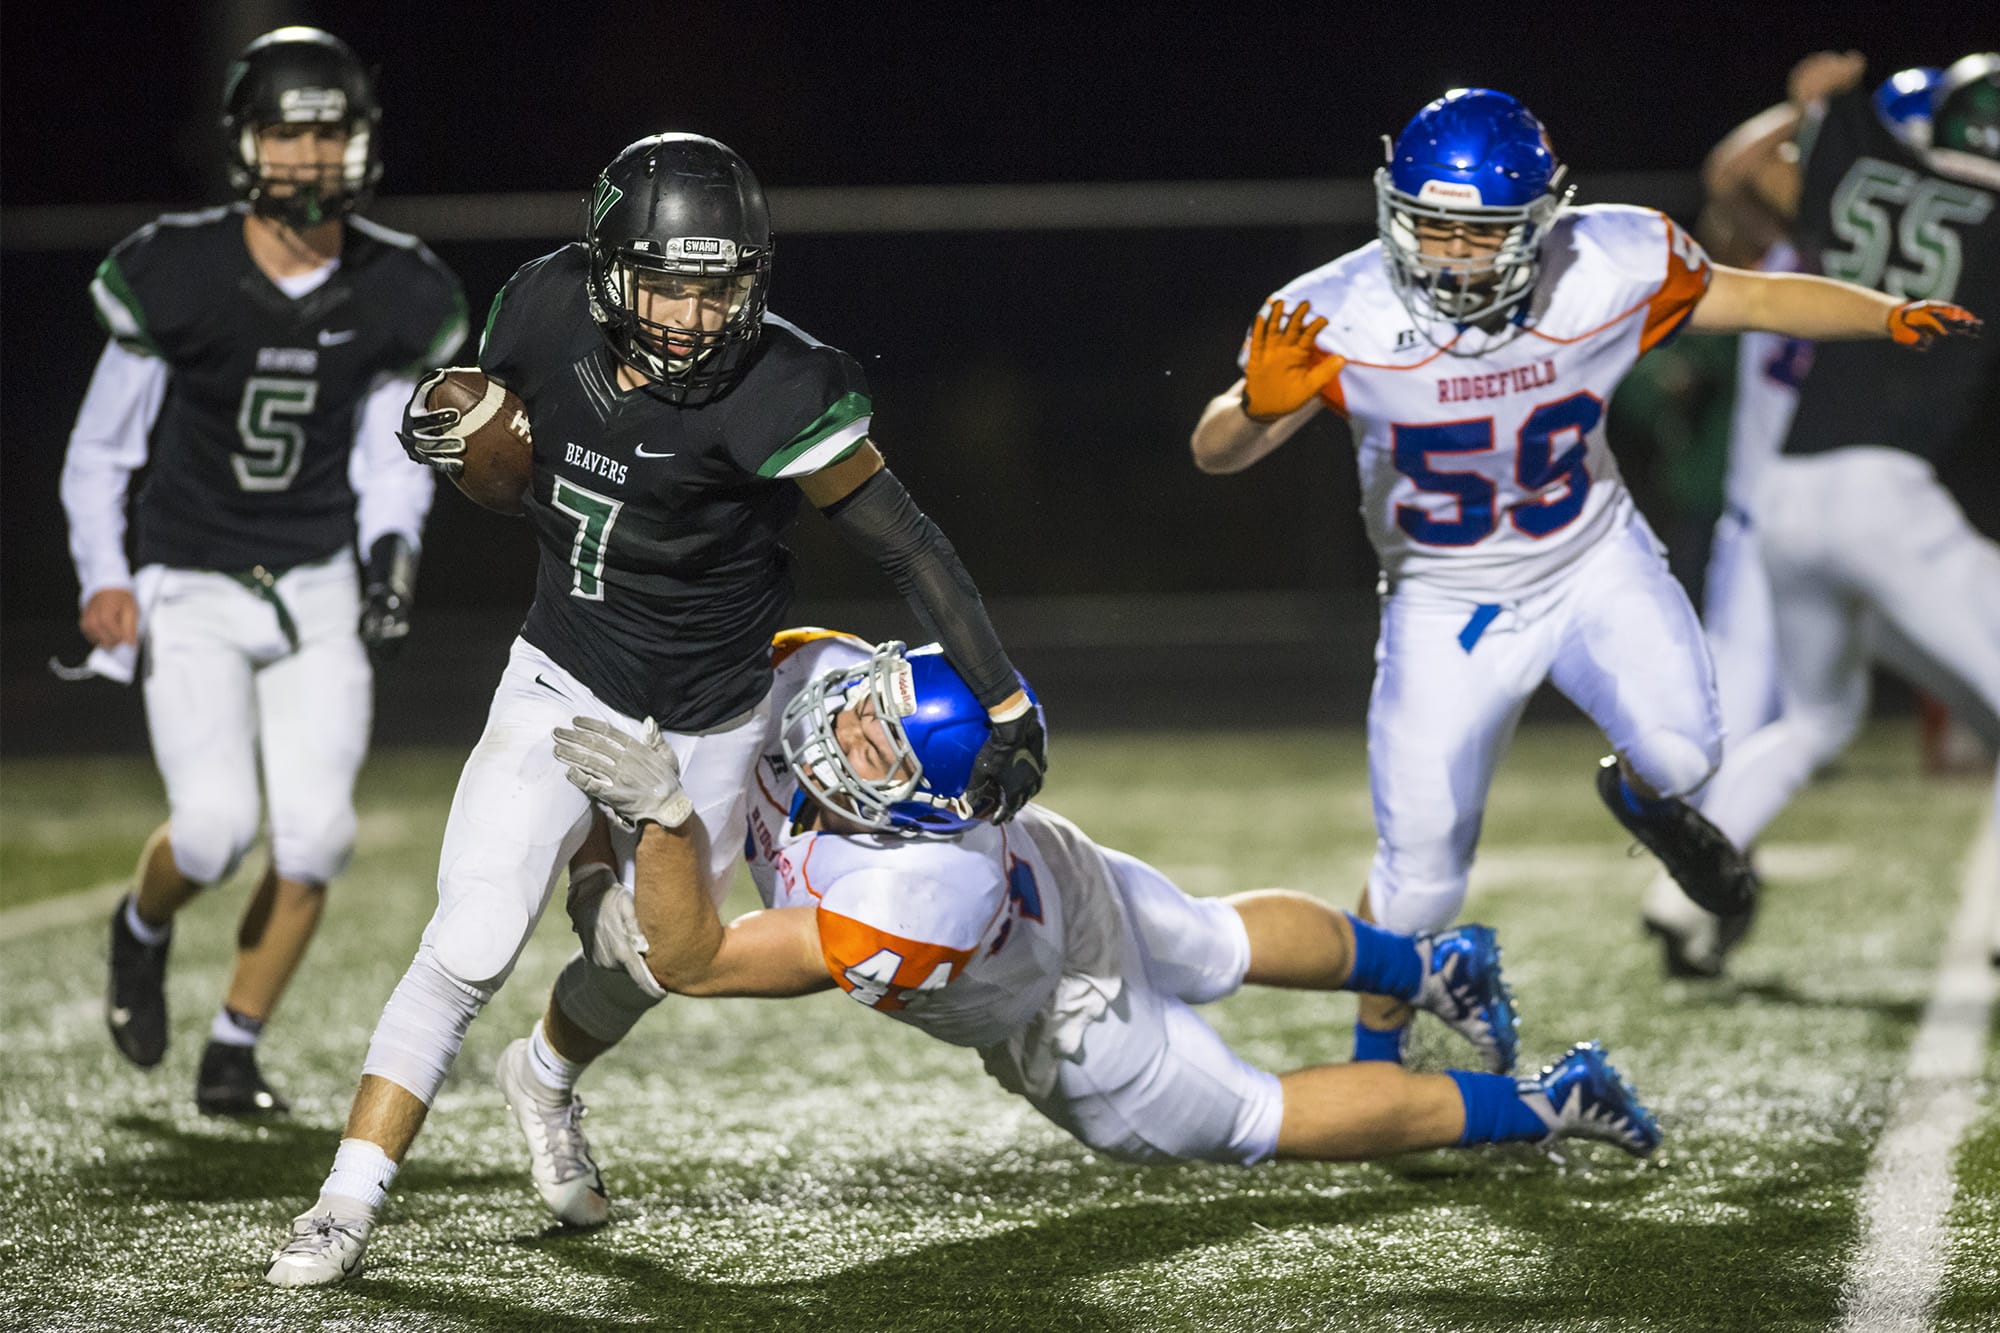 Woodland's Reid Hope breaks a tackle from a Ridgefield defender while running the ball during a game at Woodland High School on Friday night, Oct. 12, 2018.